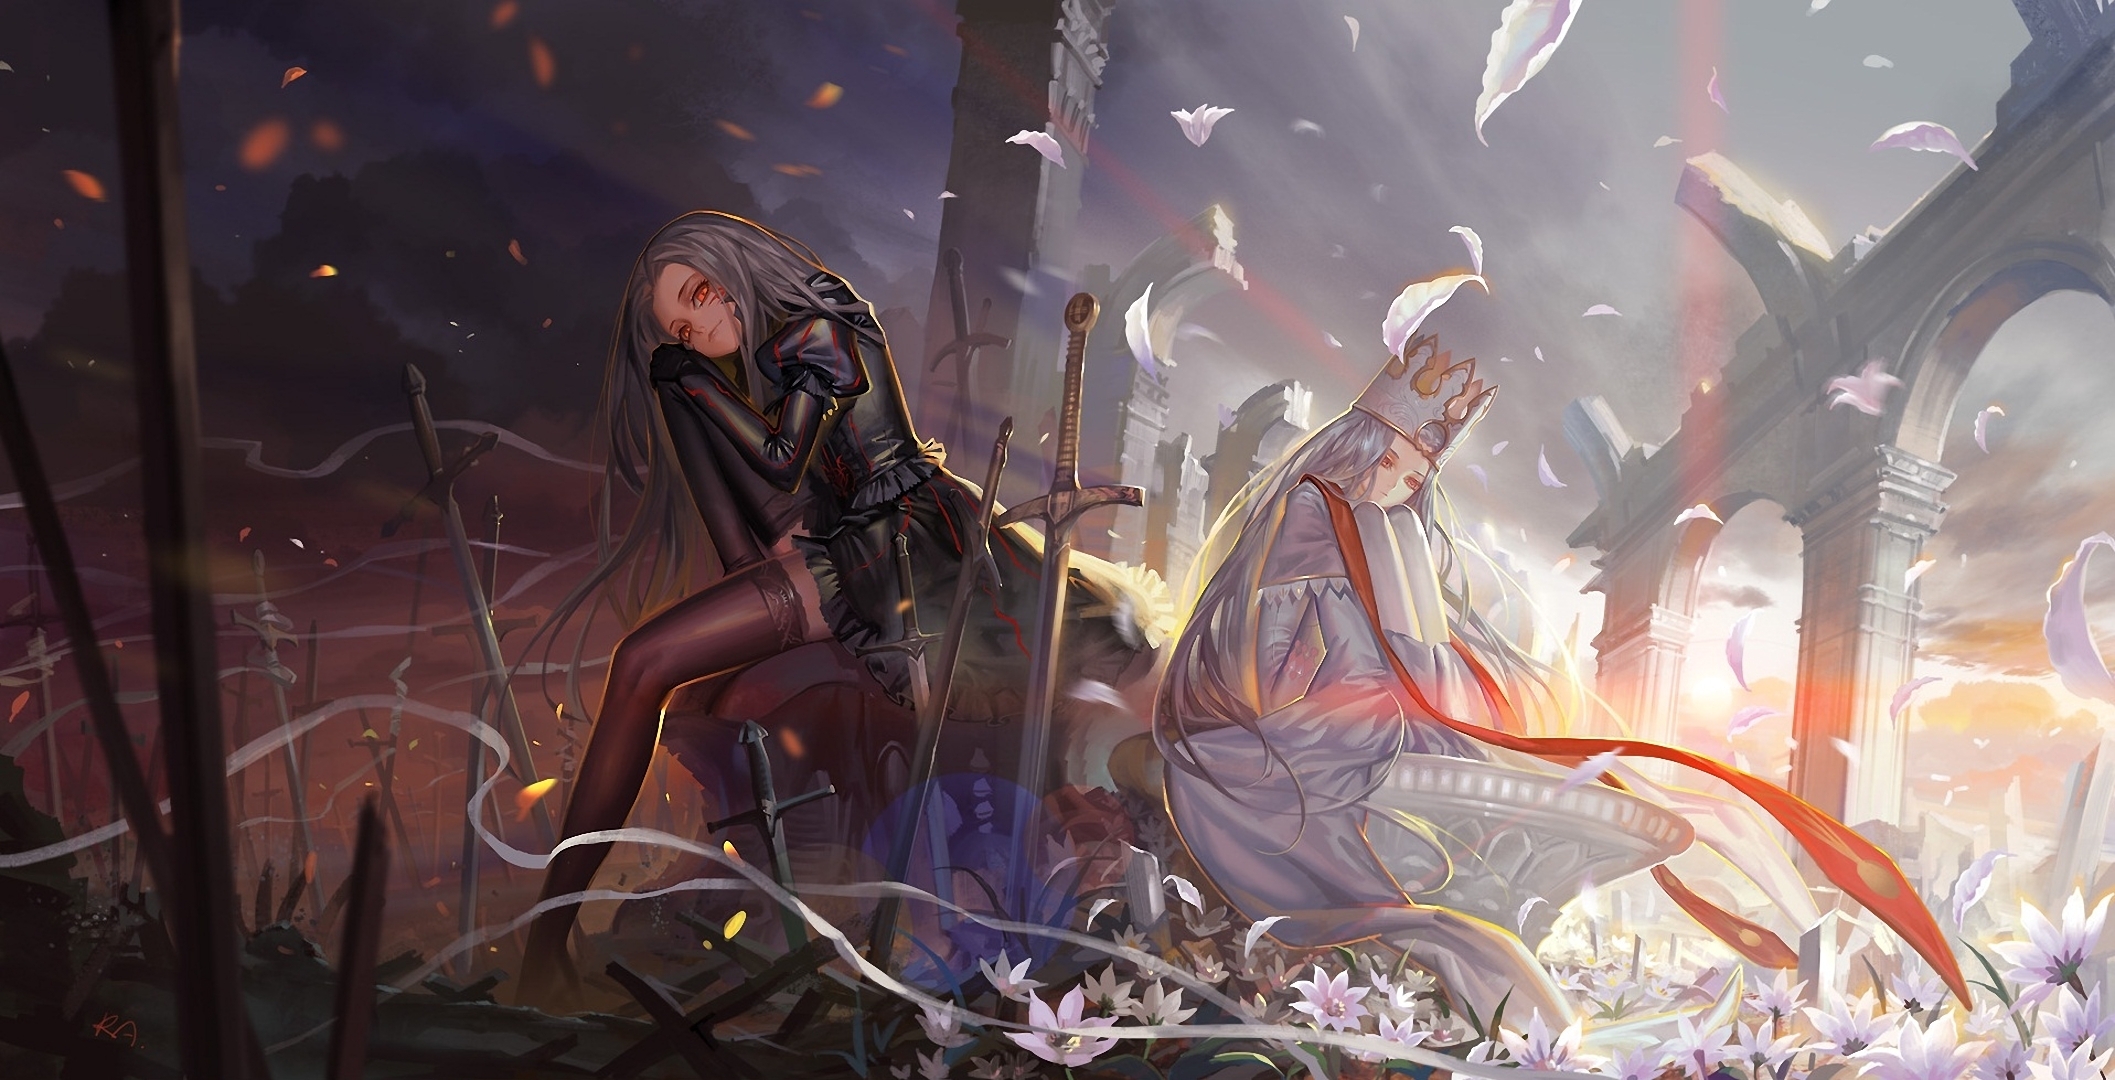 Featured image of post 1080P Fate Series Wallpaper / Saber hd wallpaper id 1920 1080 fate stay night saber wallpapers.